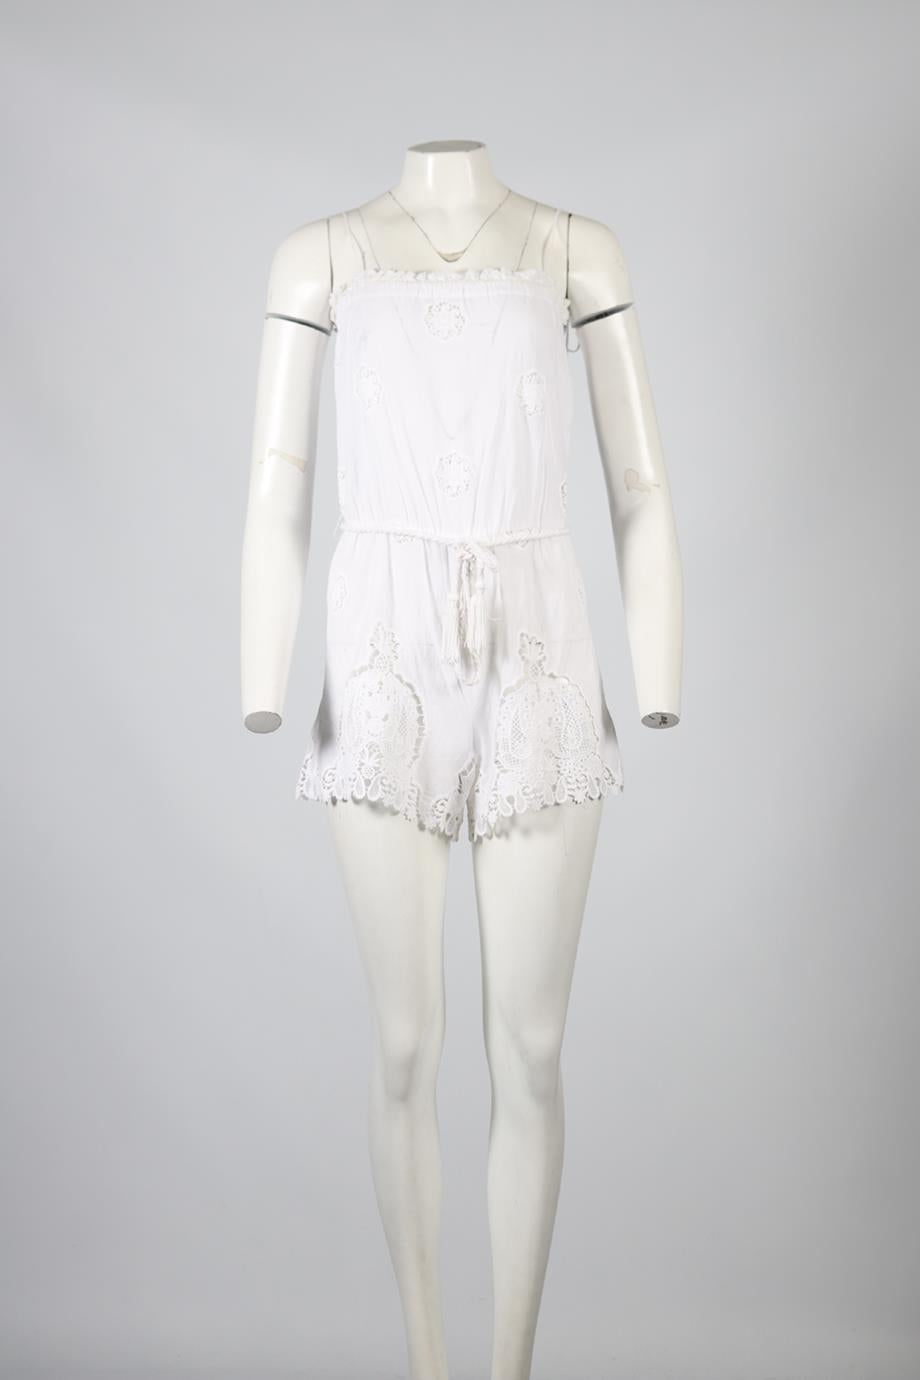 MIGUELINA COTTON PLAYSUIT SMALL